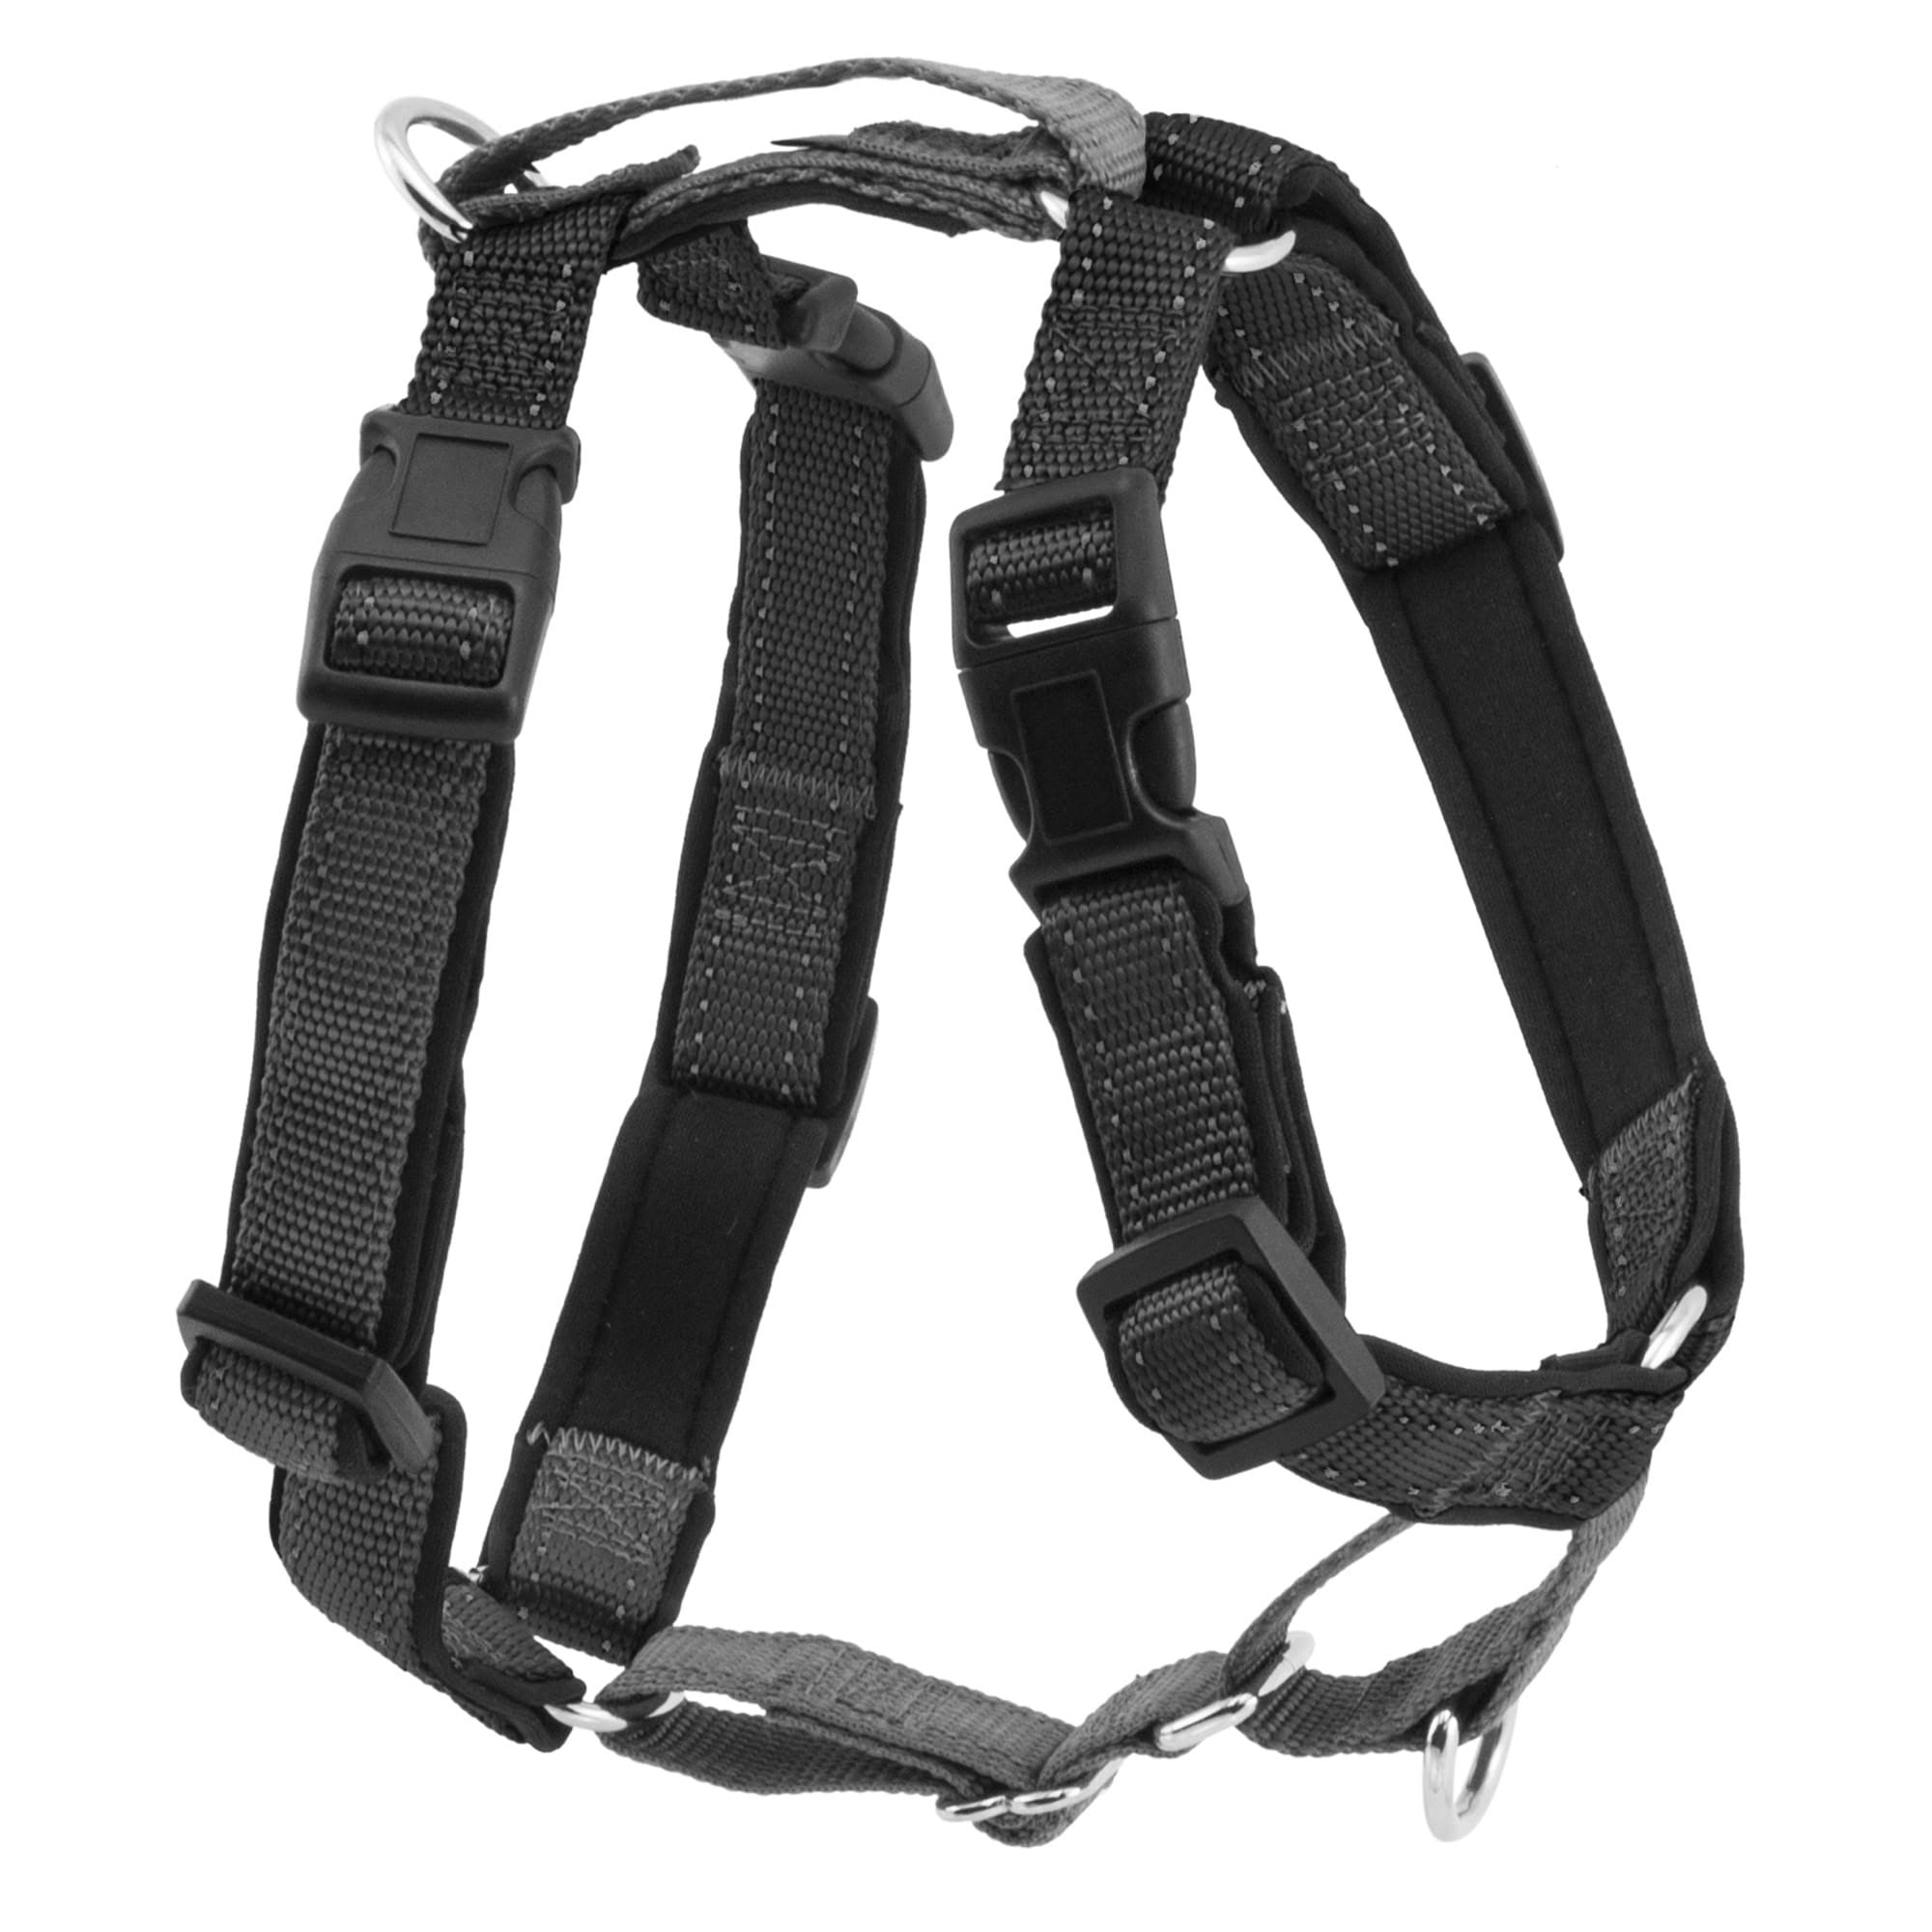 Petsafe 3 in 1 Dog Harness - Black, Small